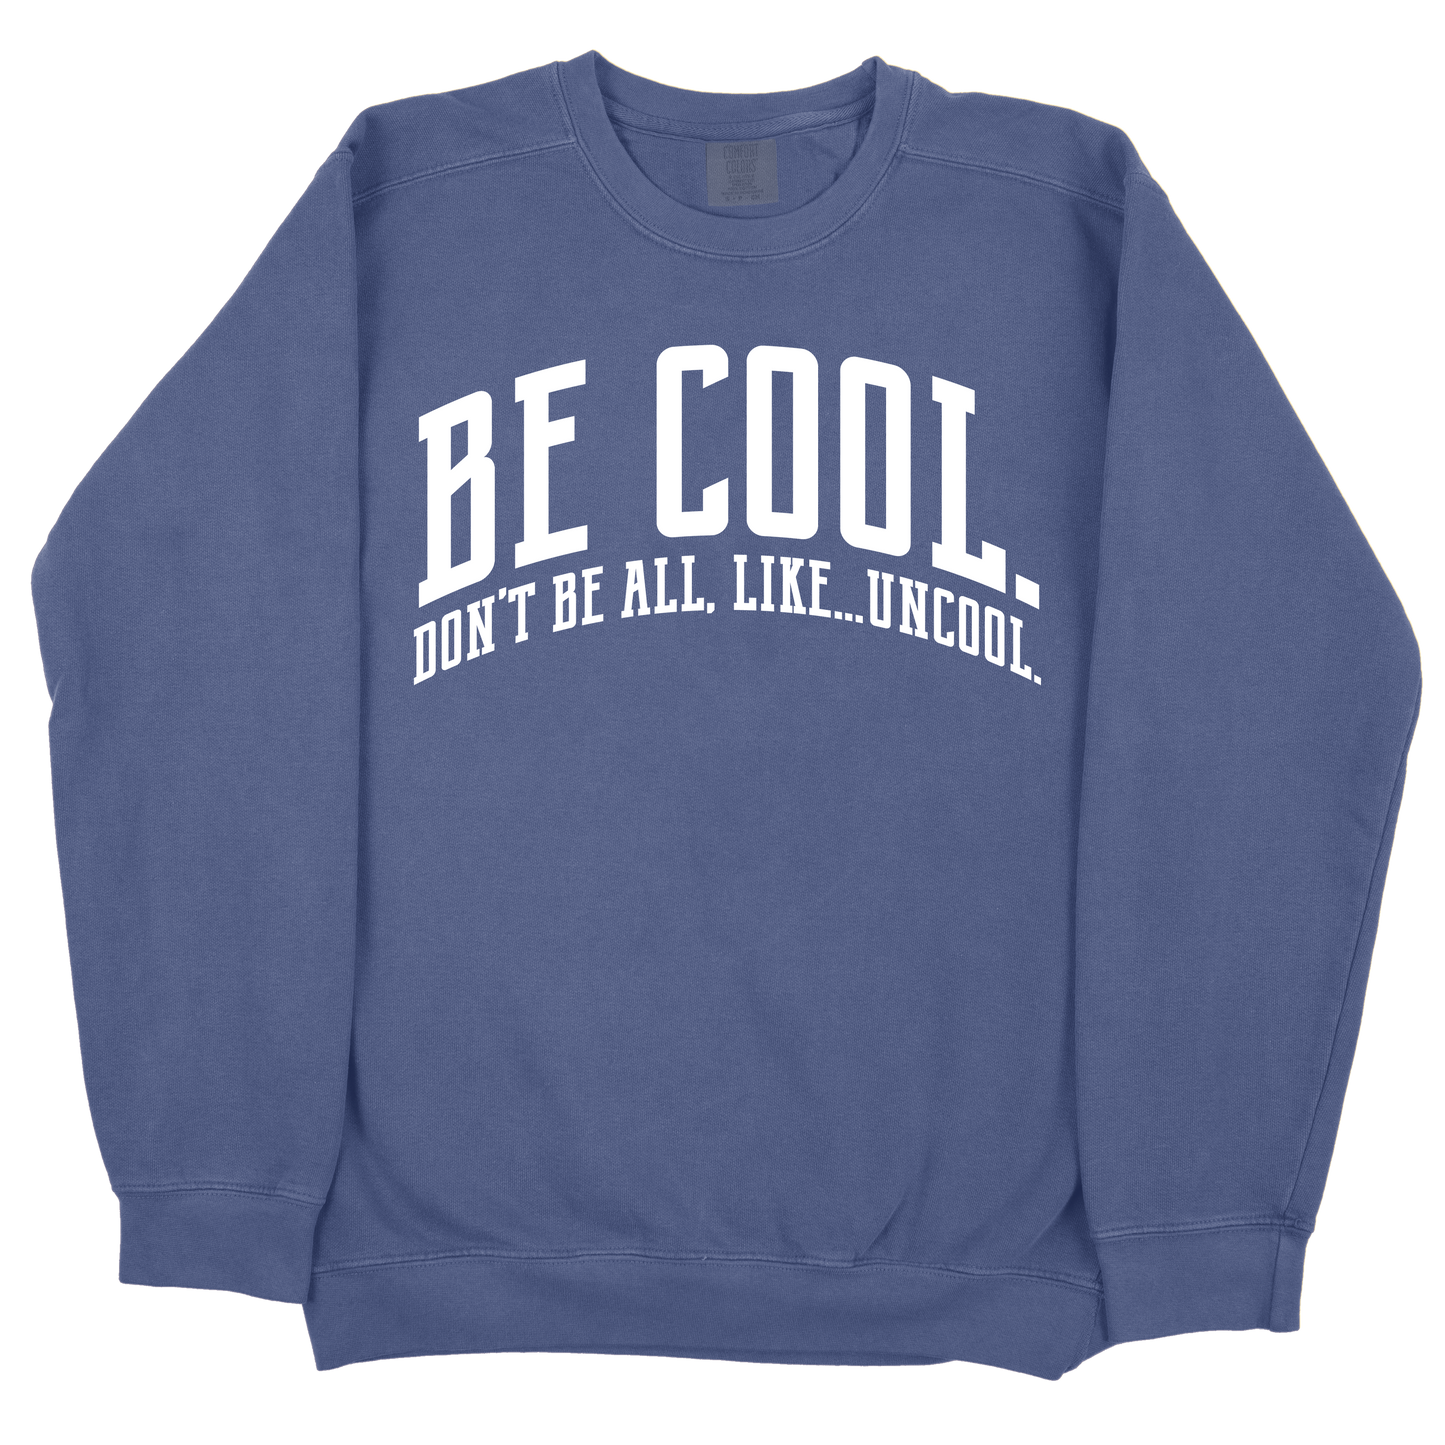 Be Cool. Don't Be All, Like...Uncool CC Sweatshirt - Navy